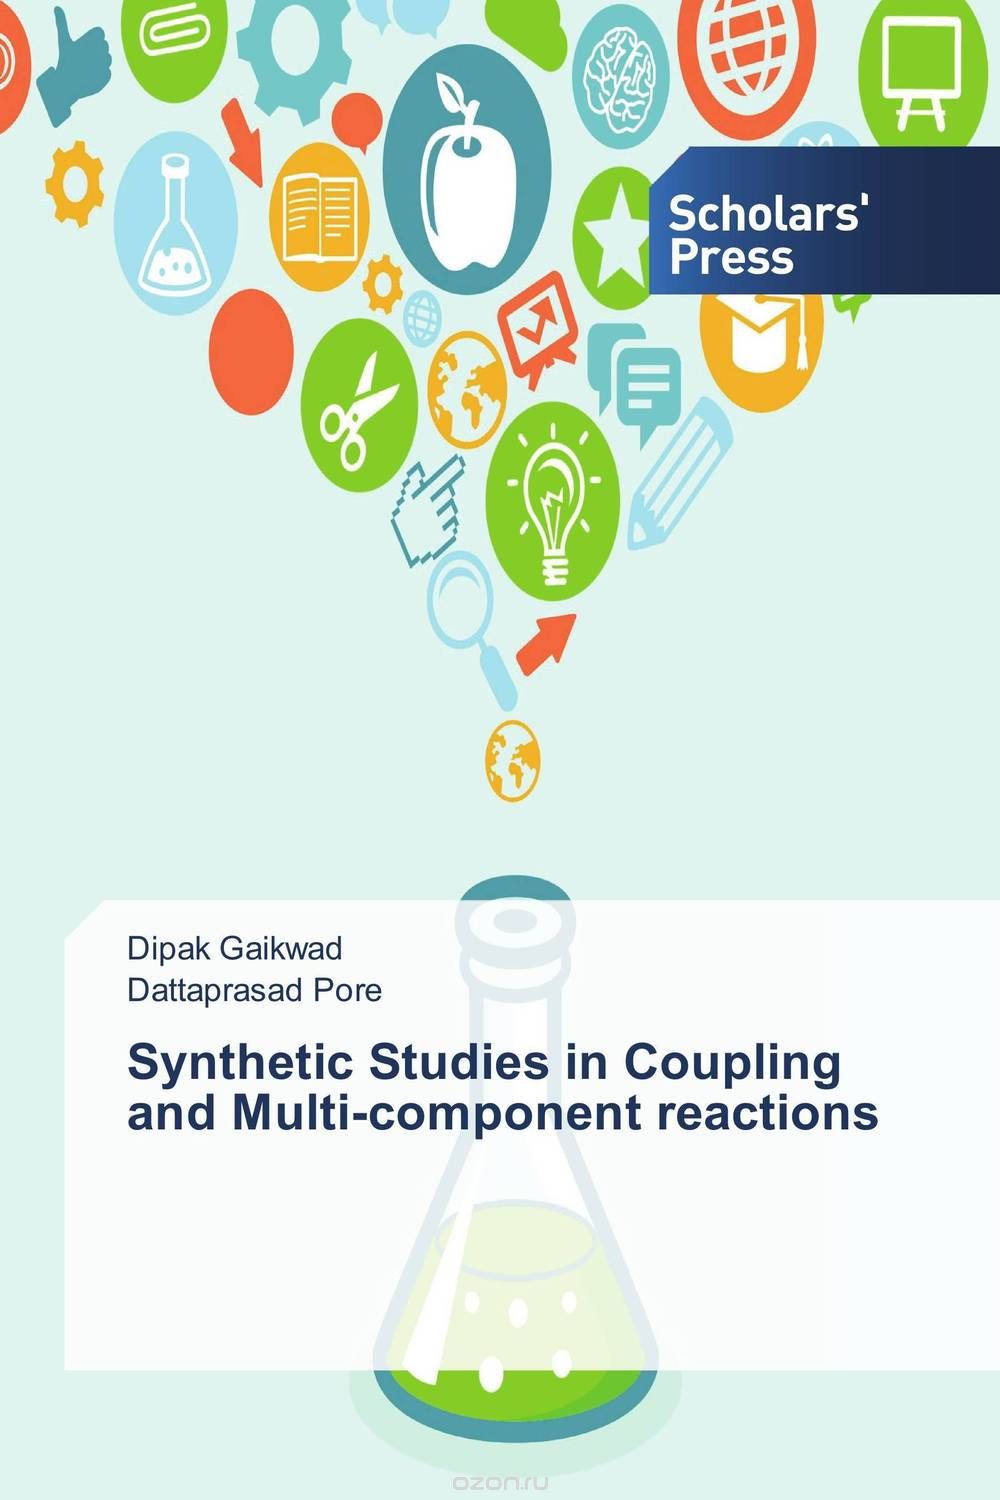 Synthetic Studies in Coupling and Multi-component reactions